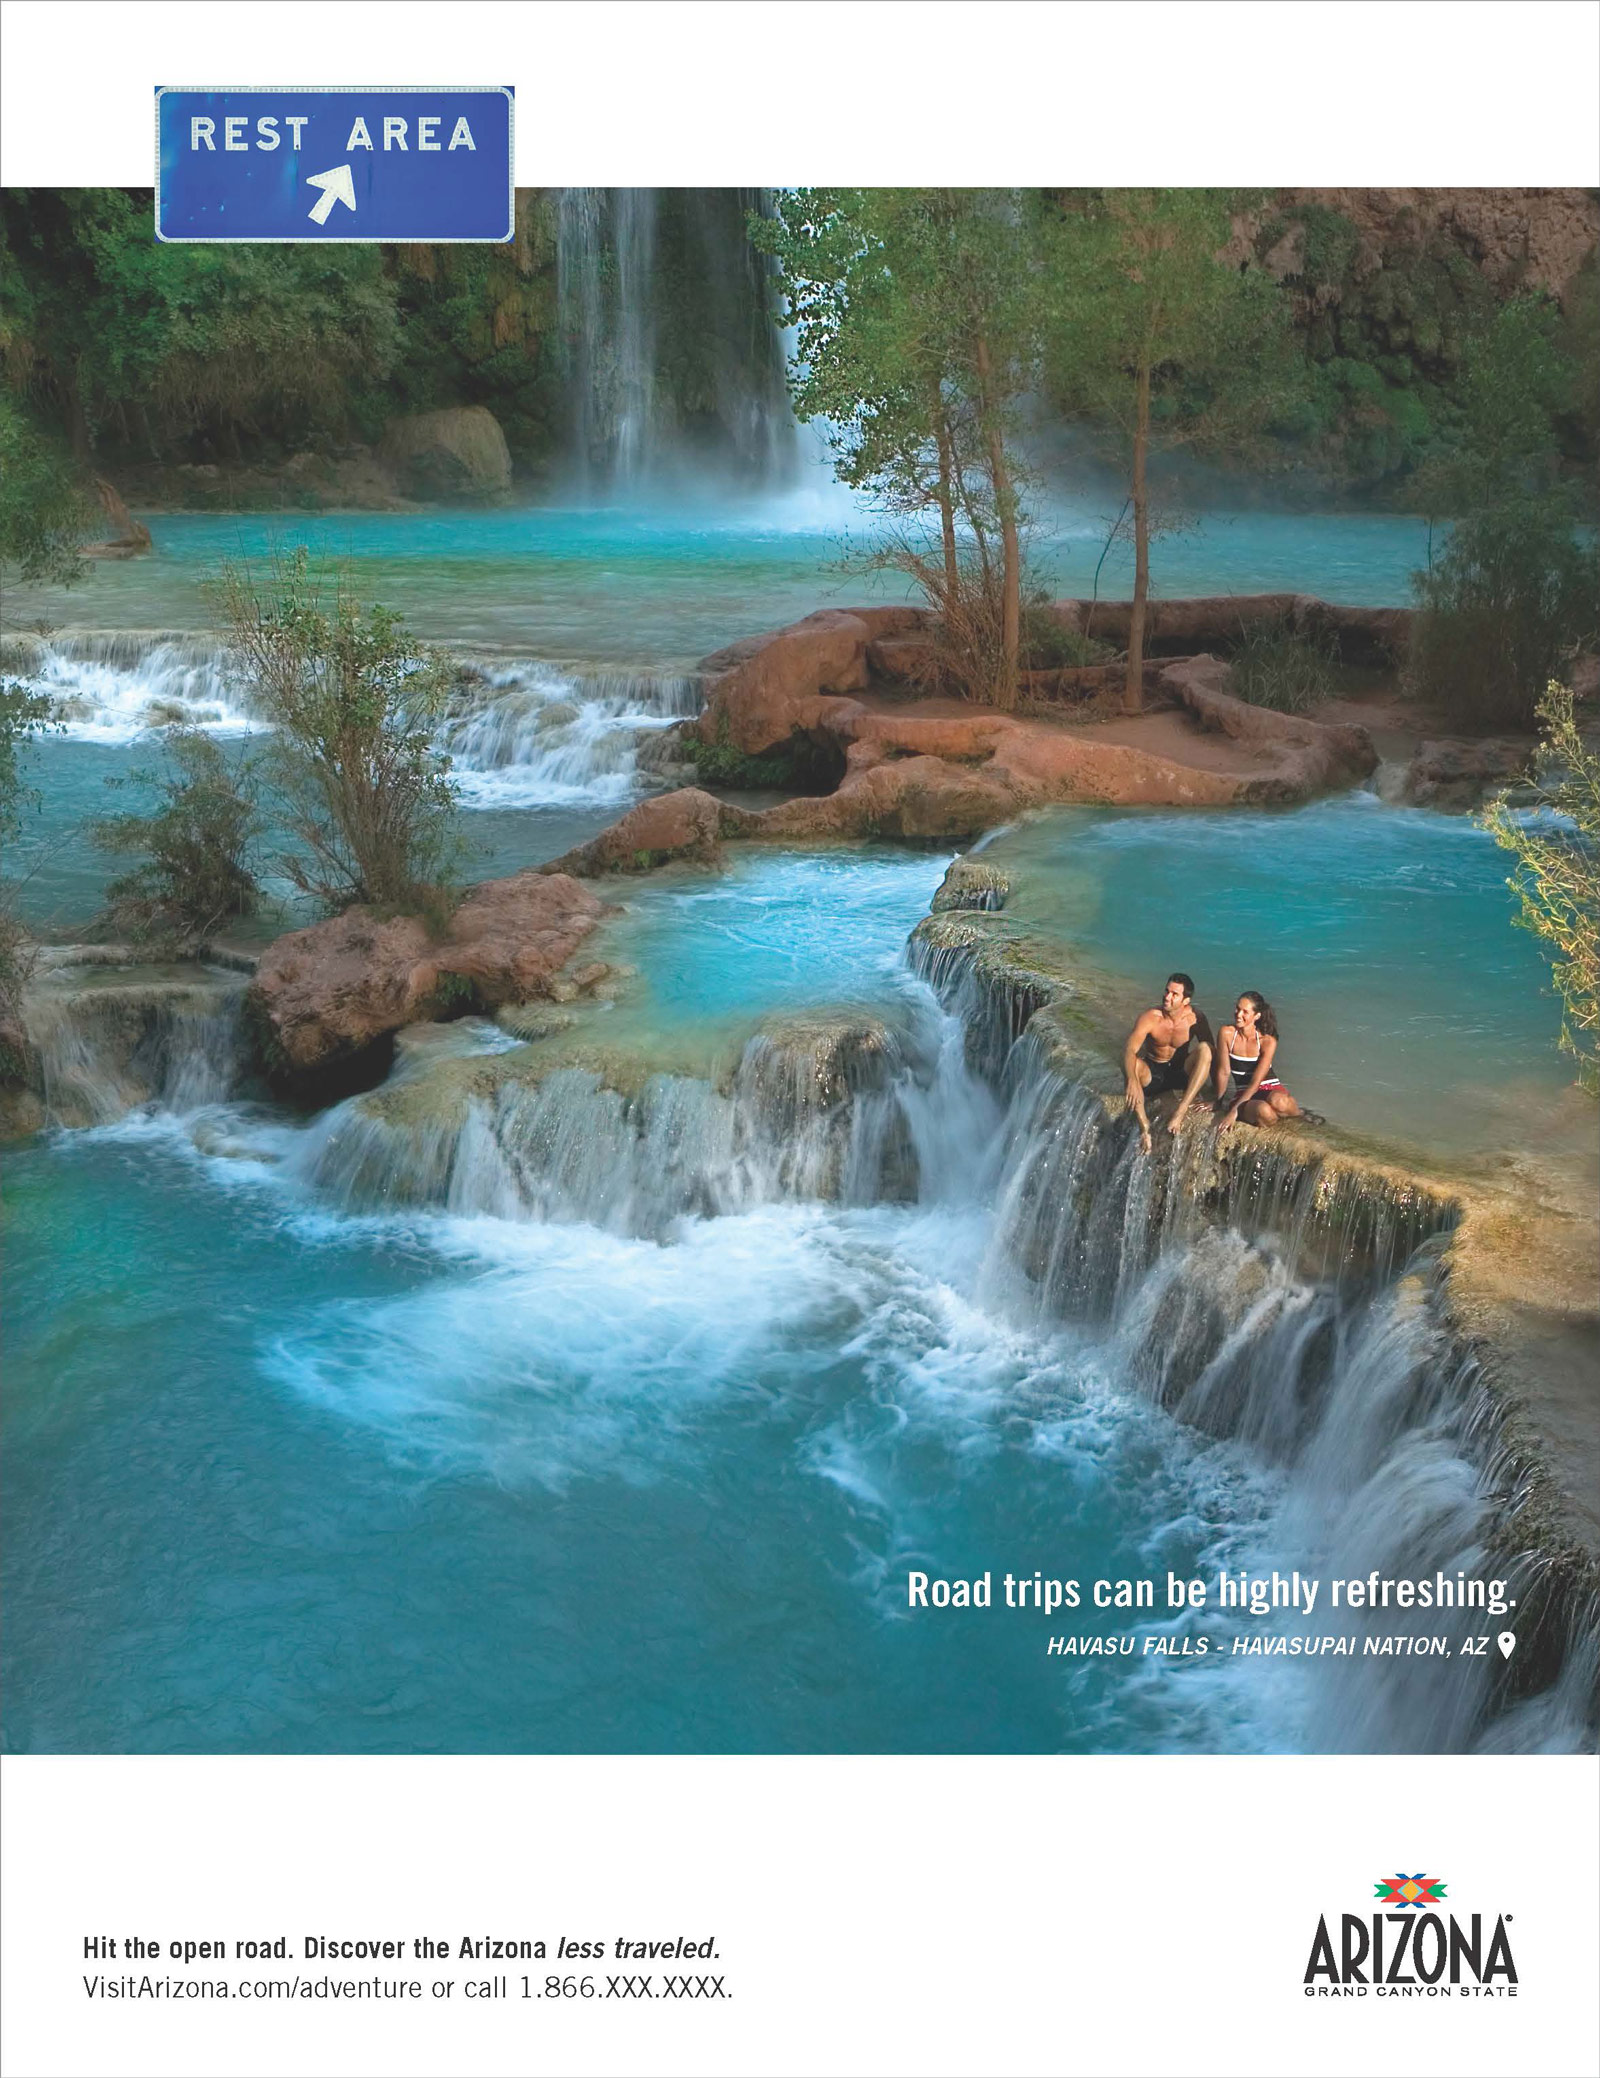 Arizona Office of Tourism - Rest Stop ad